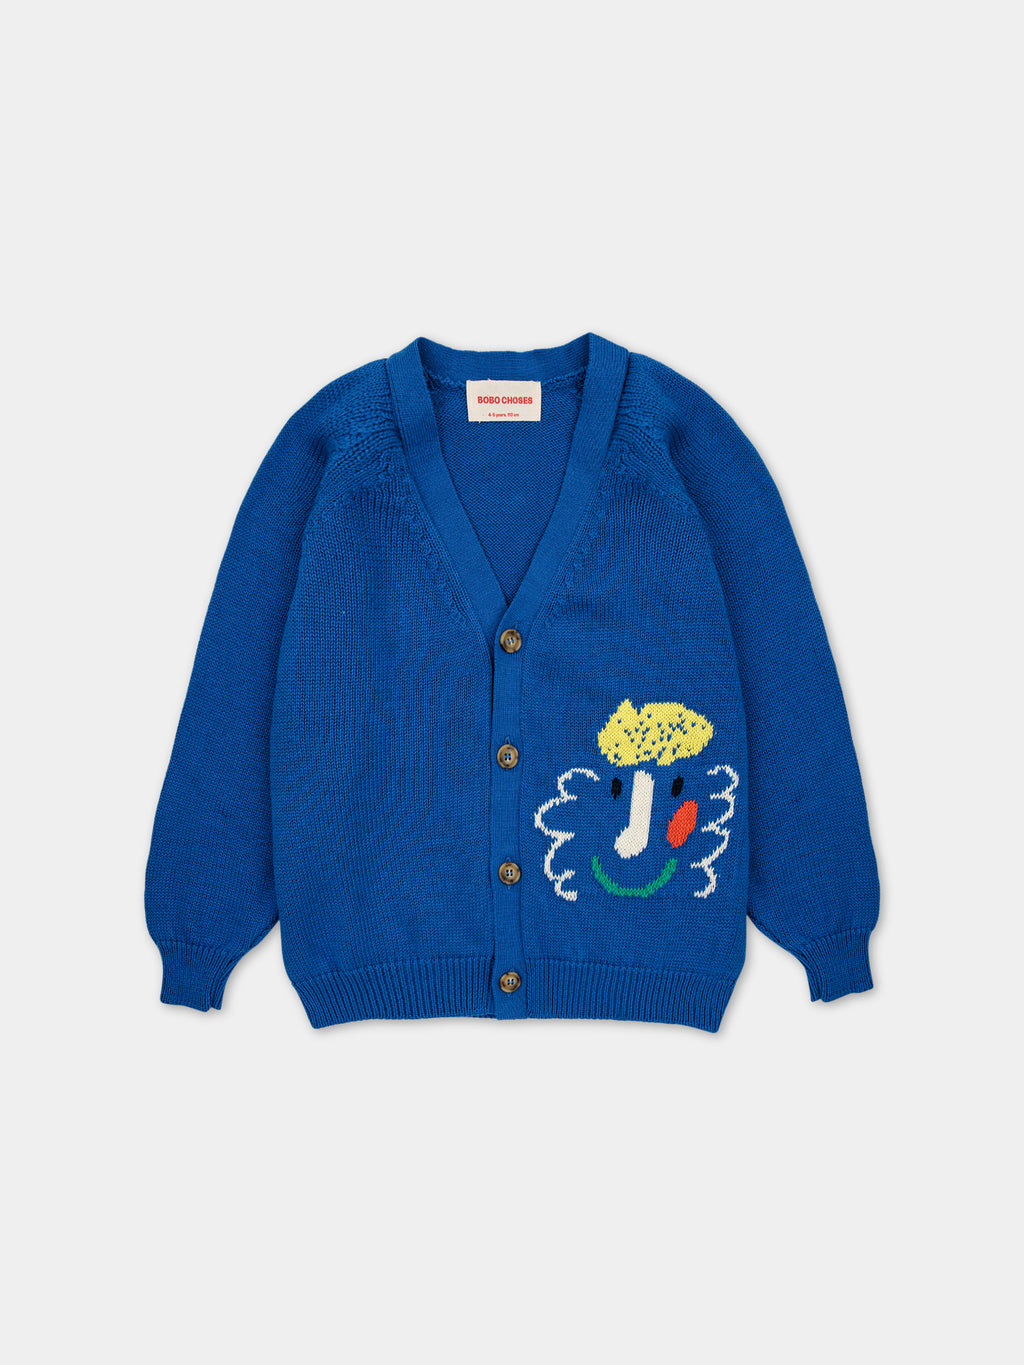 Blue cardigan for kids with embroidered pattern